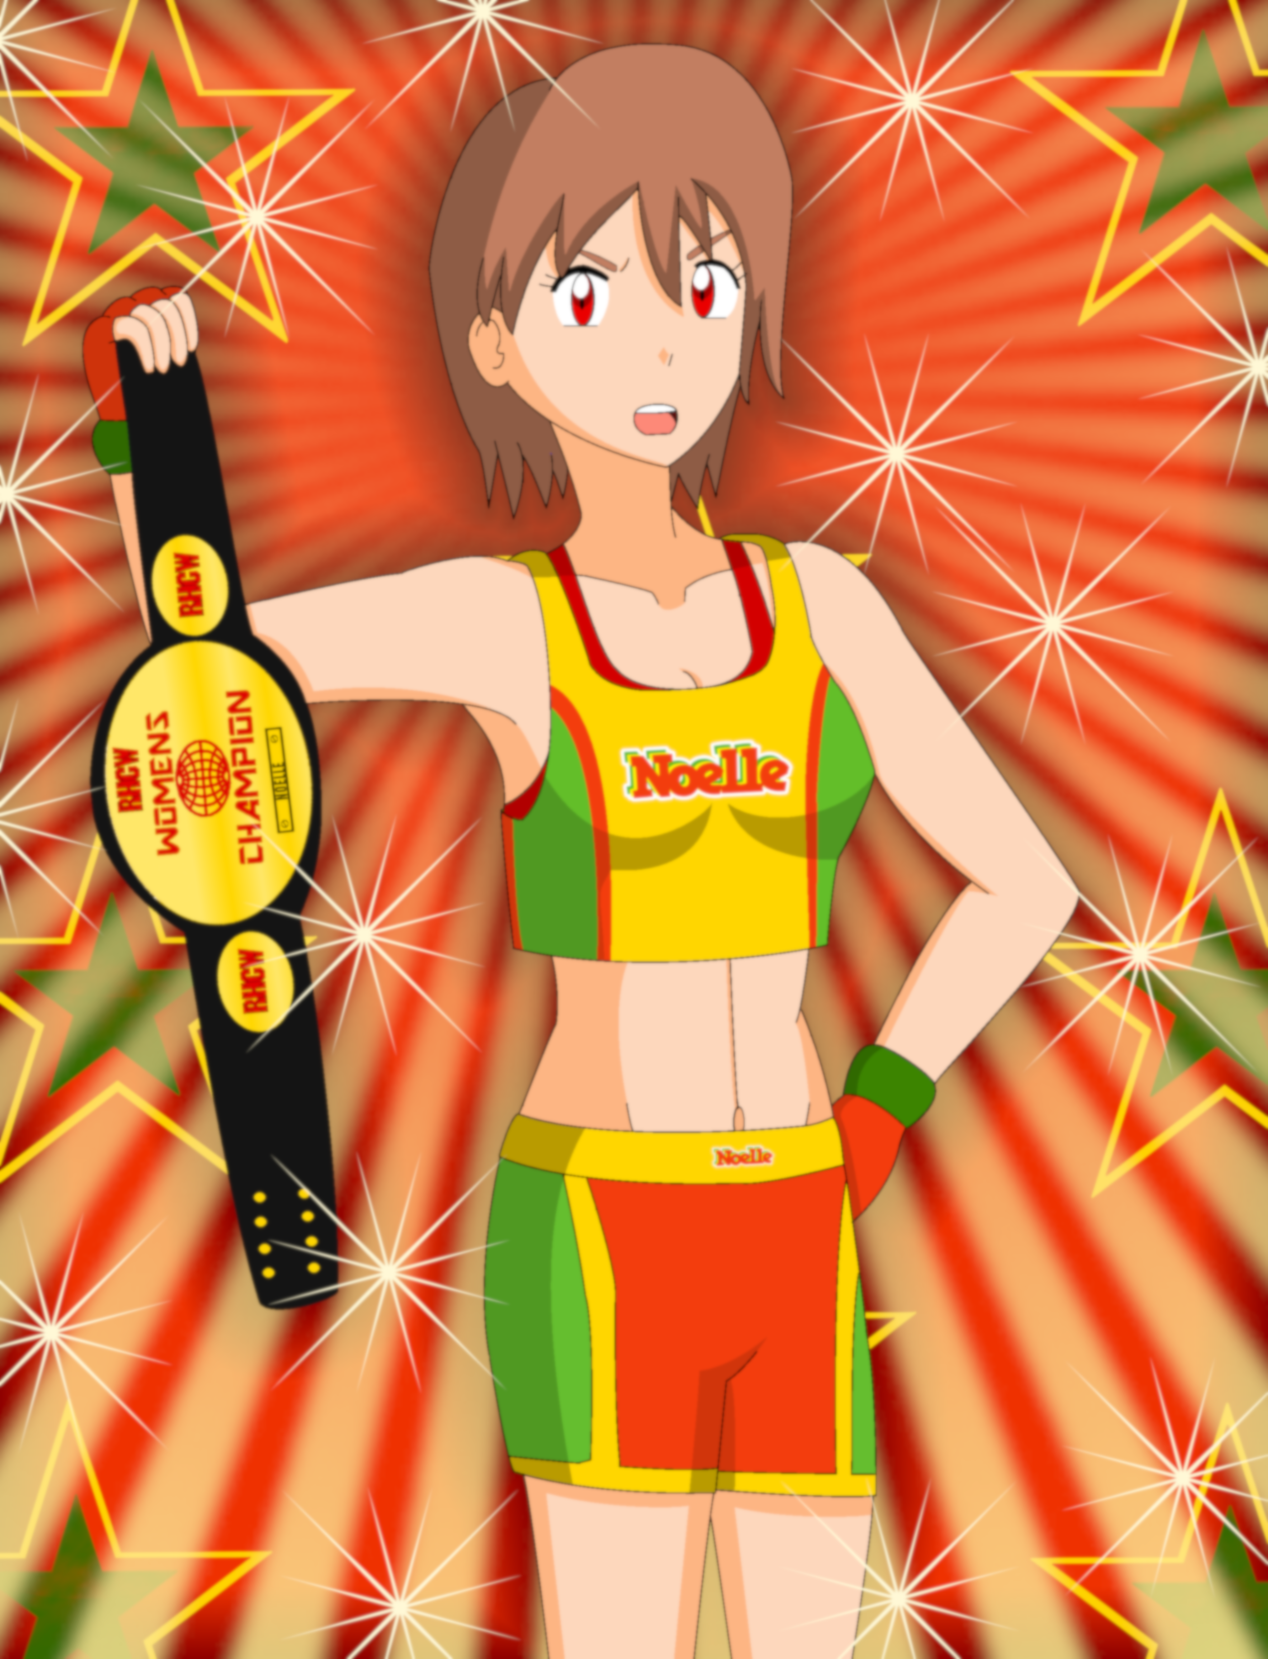 Noelle the champion by RevolutionHellCowboy